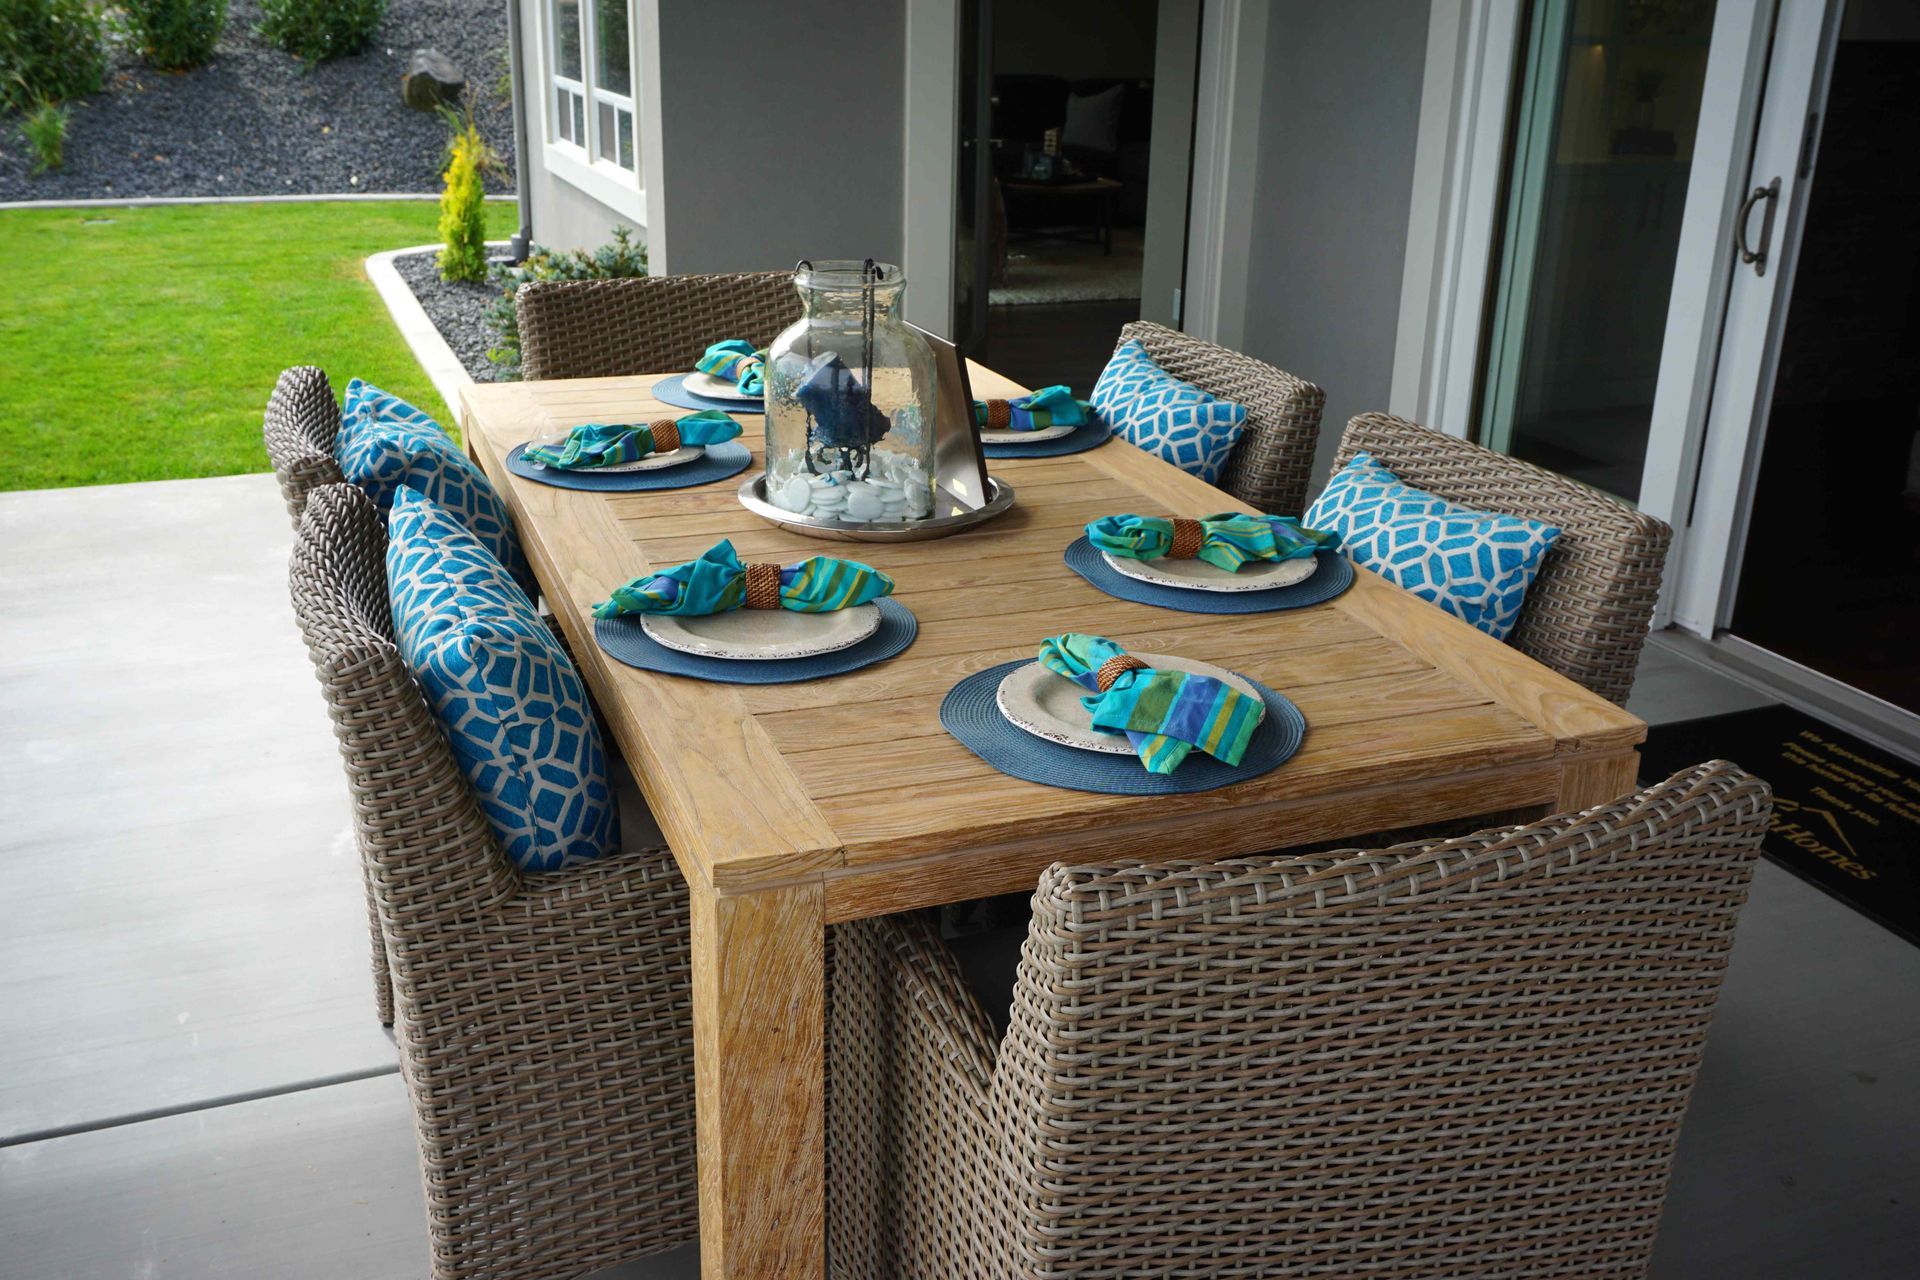 A table set for dinner on an outdoor patio